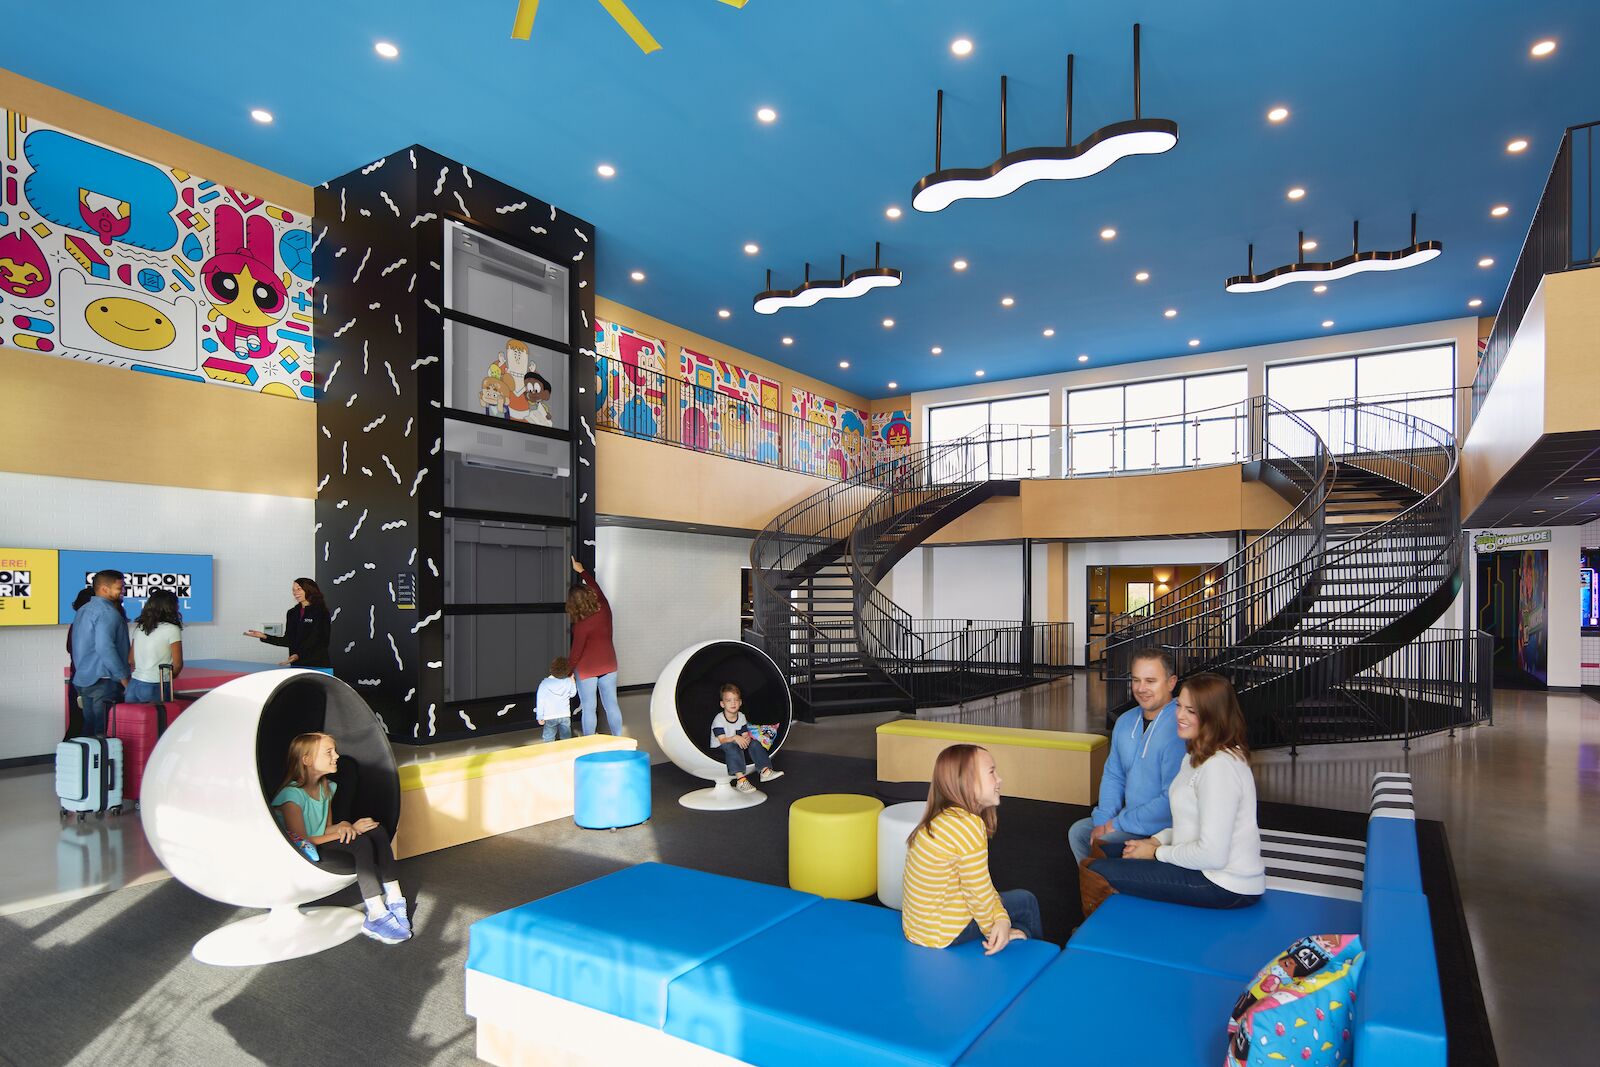 Fun space for kids at cartoon network hotel